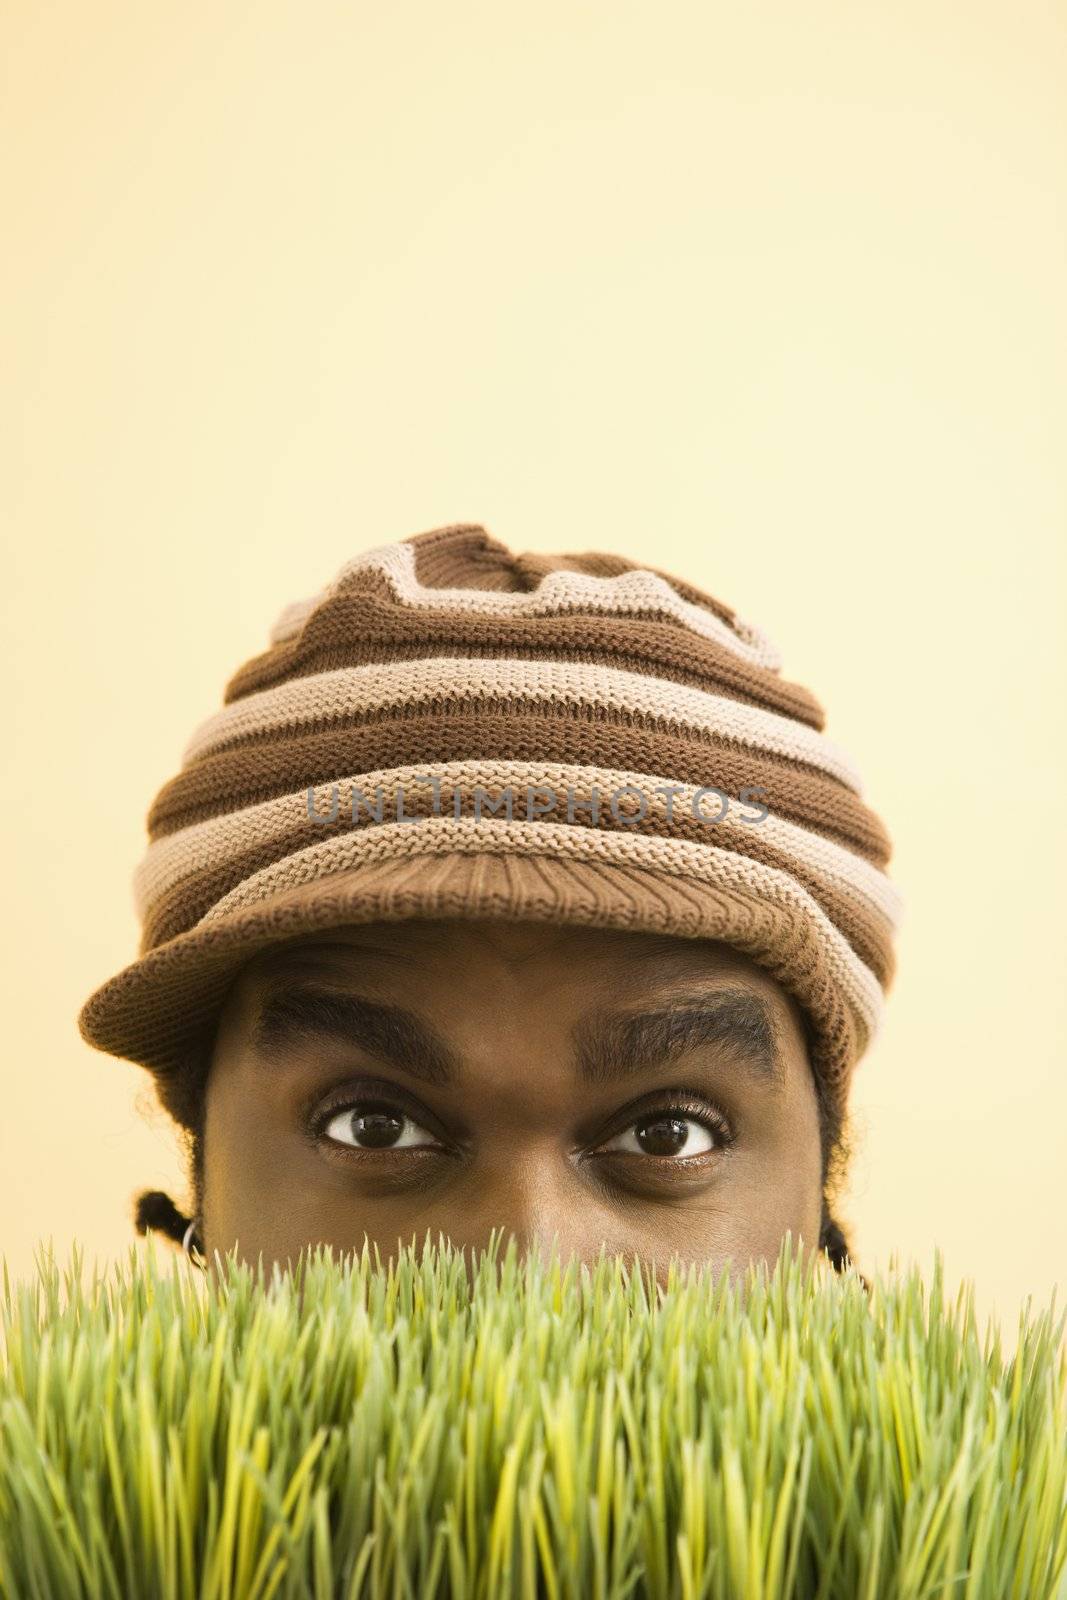 African-American mid-adult man wearing knit hat with brim peeking at viewer from behind grass.